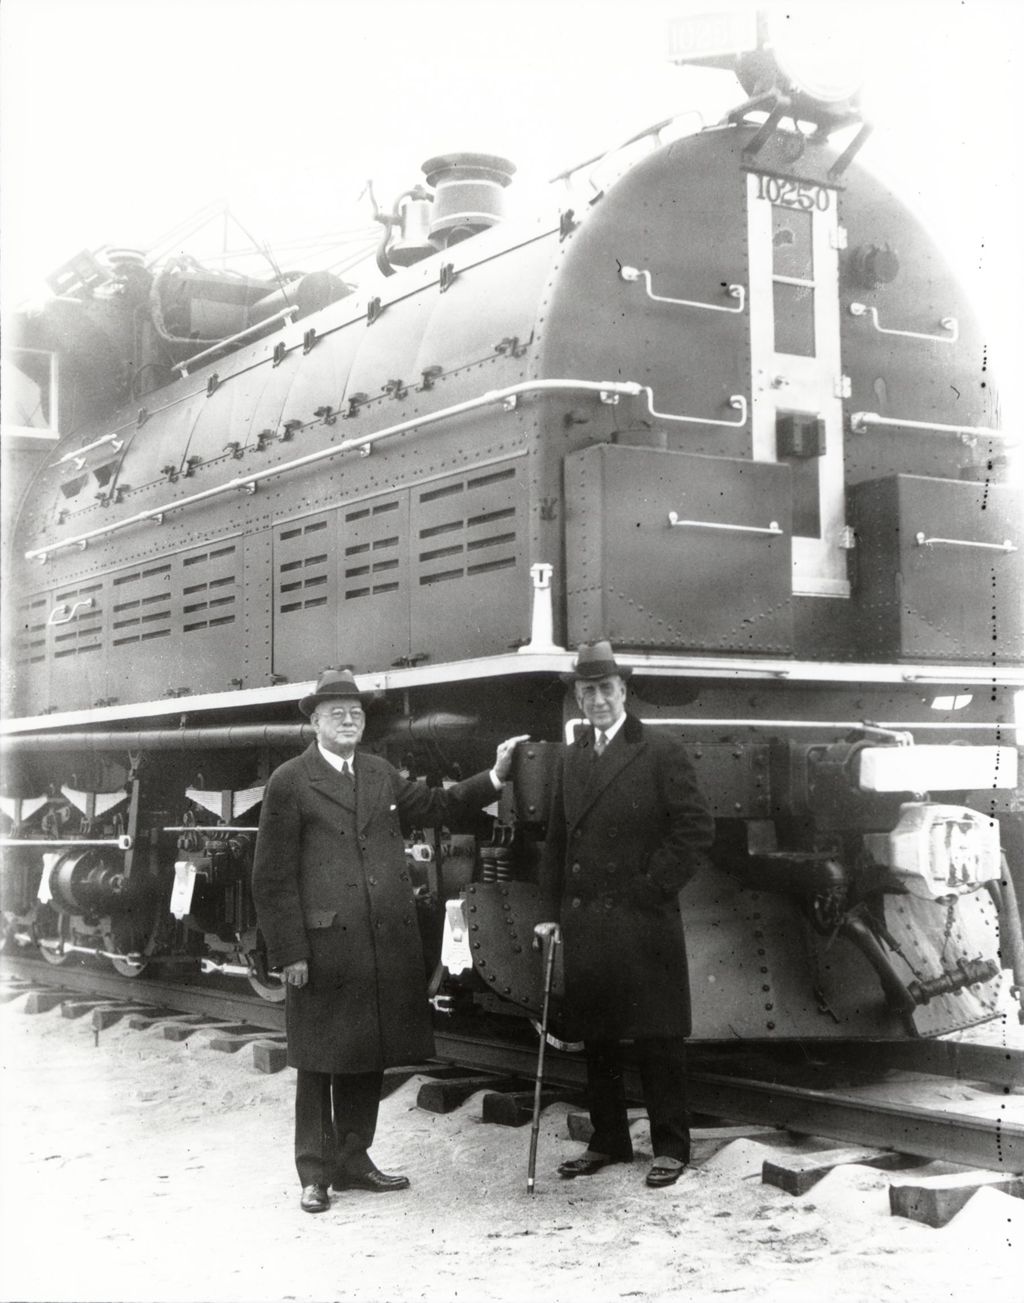 Miniature of Rufus C. Dawes (right), president of the Century of Progress, in front of the Chicago, St. Paul & Milwaukee locomotive.